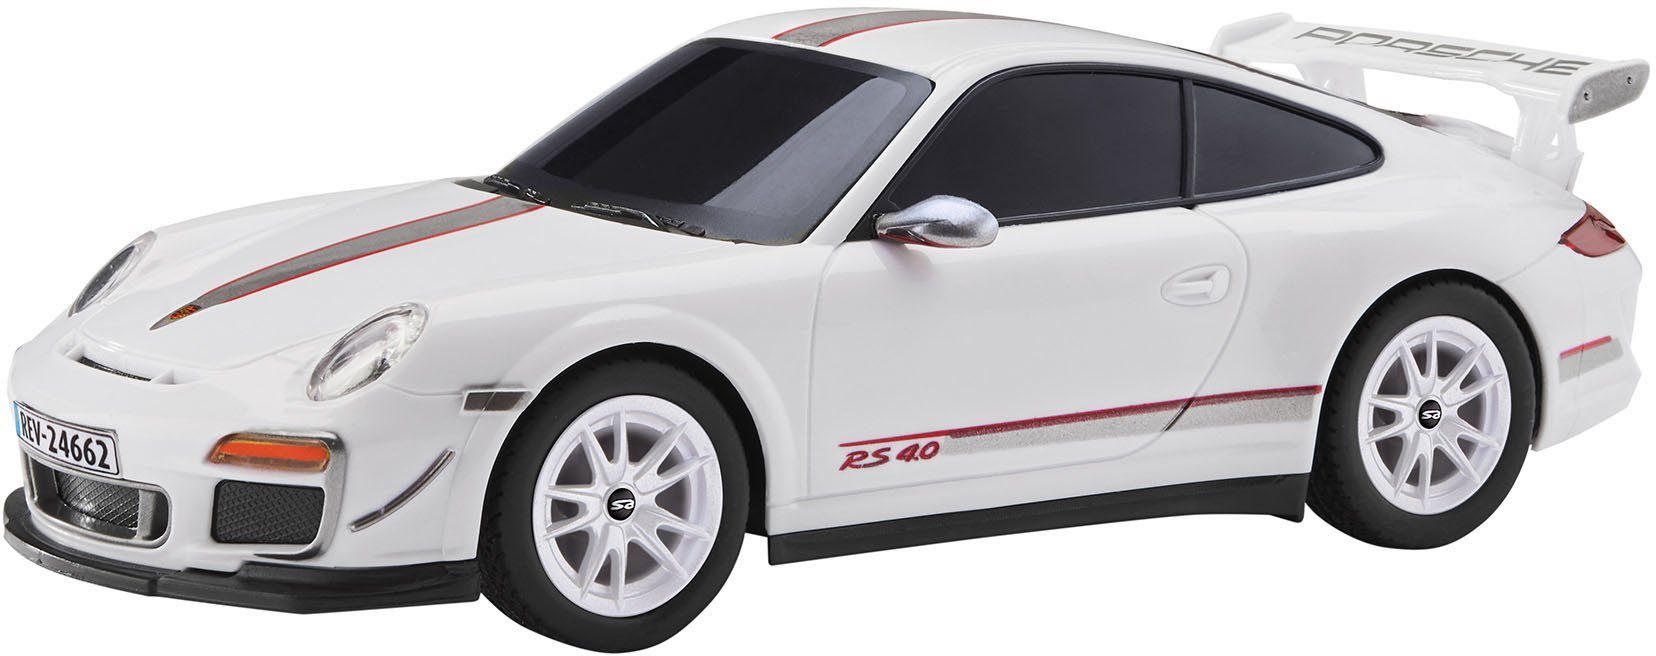 Porsche RS Revell® 911 Revell® RC-Auto GT3 control,